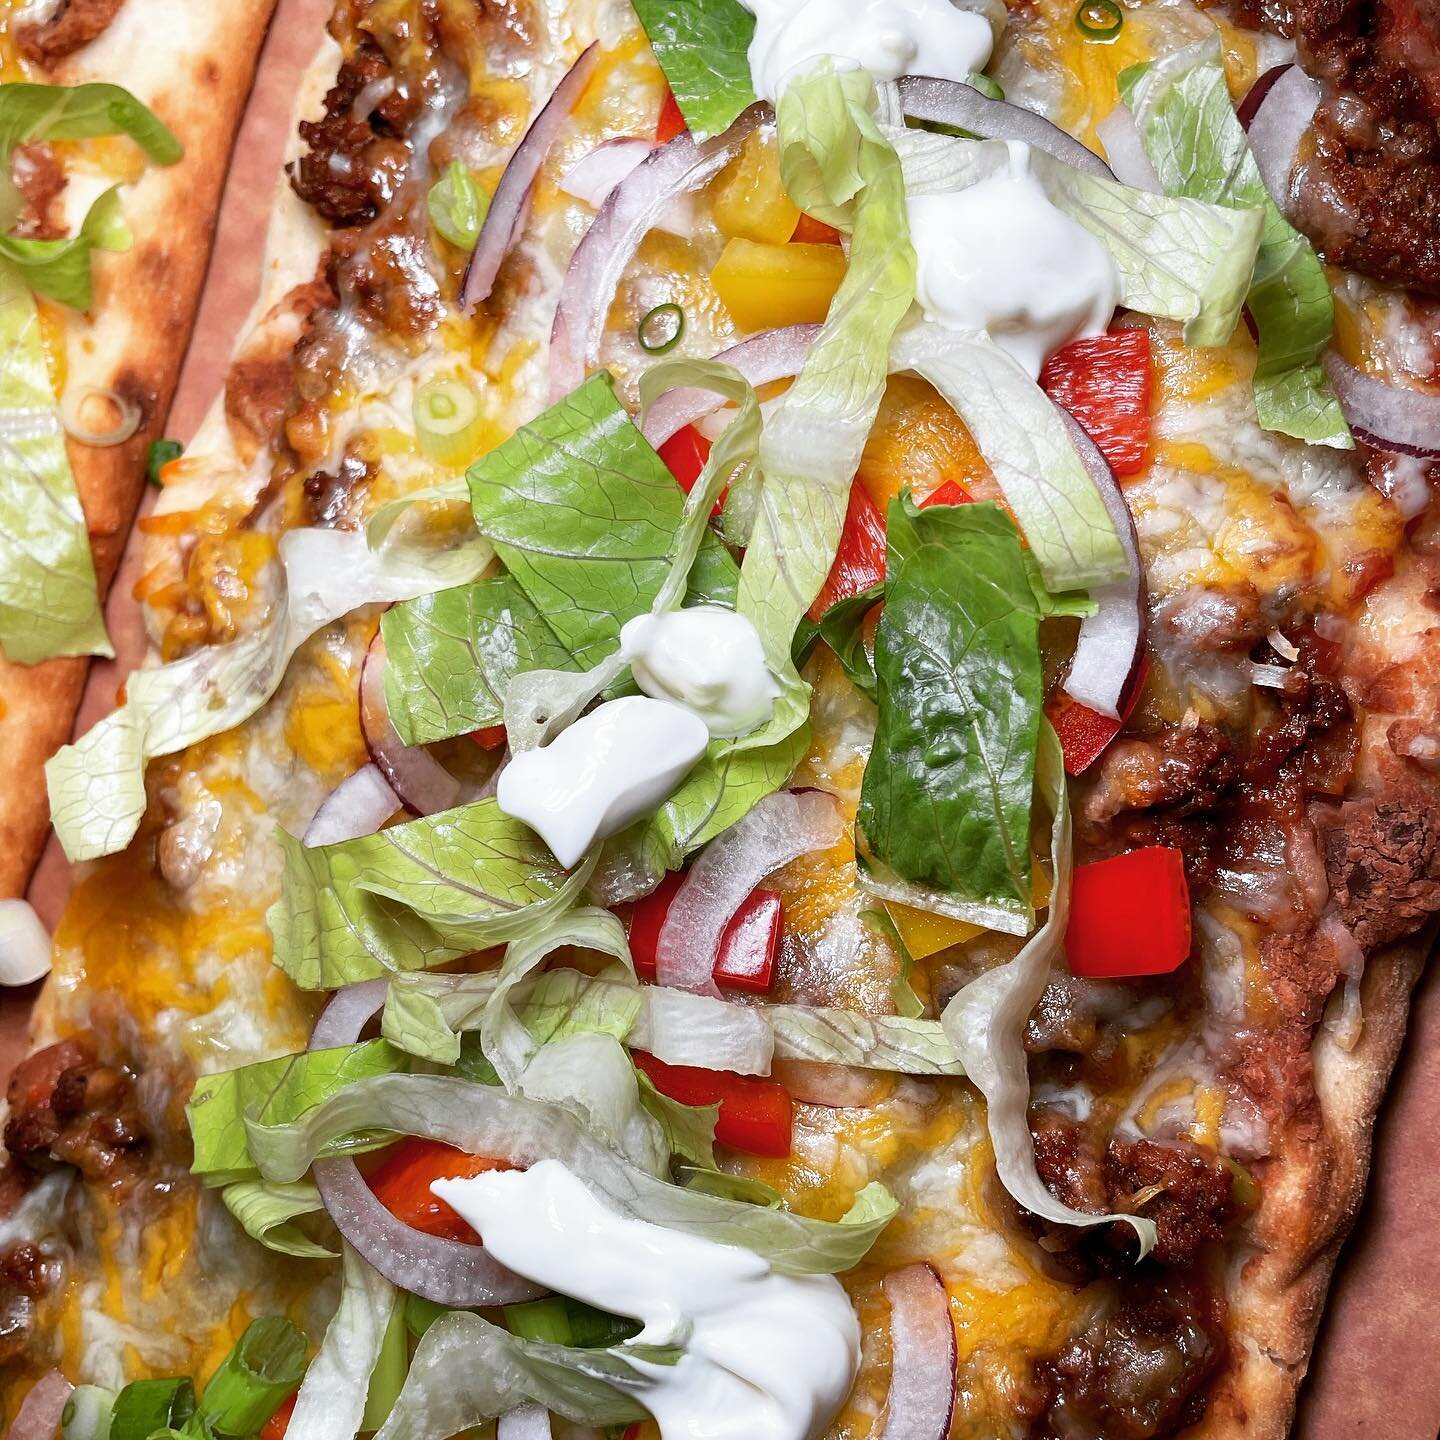 Taco Tuesday is going to look like this today&hellip; Taco Flatbreads! 🌮 🌮 🌮

Simply spread refried beans on your flatbread, then add seasoned ground beef and finally topped with cheese. Bake at 425 for 8 minutes and then add toppings.  We used le